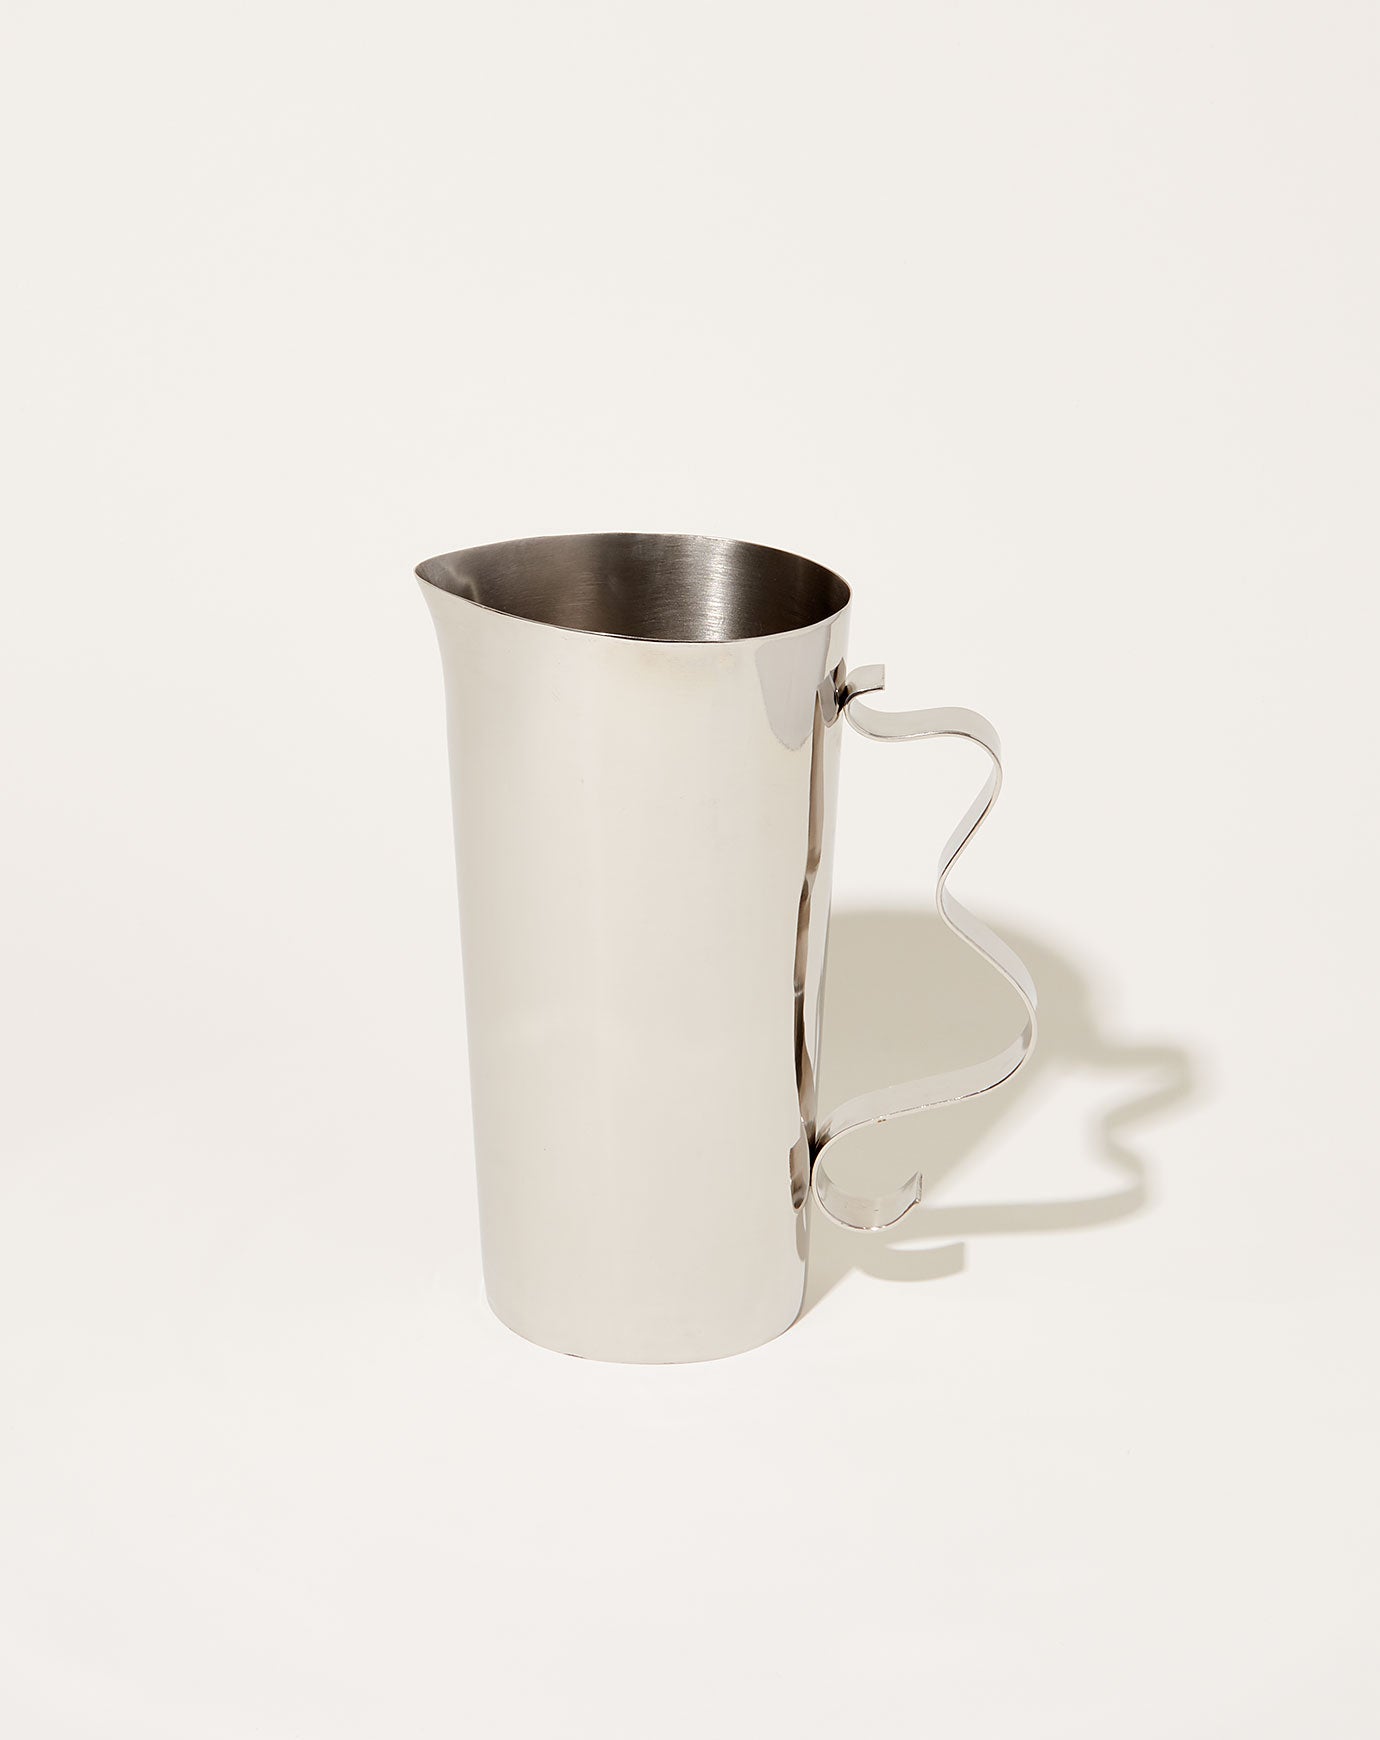 Sophie Lou Jacobsen Squiggle Pitcher in Mirror Polish Stainless Steel